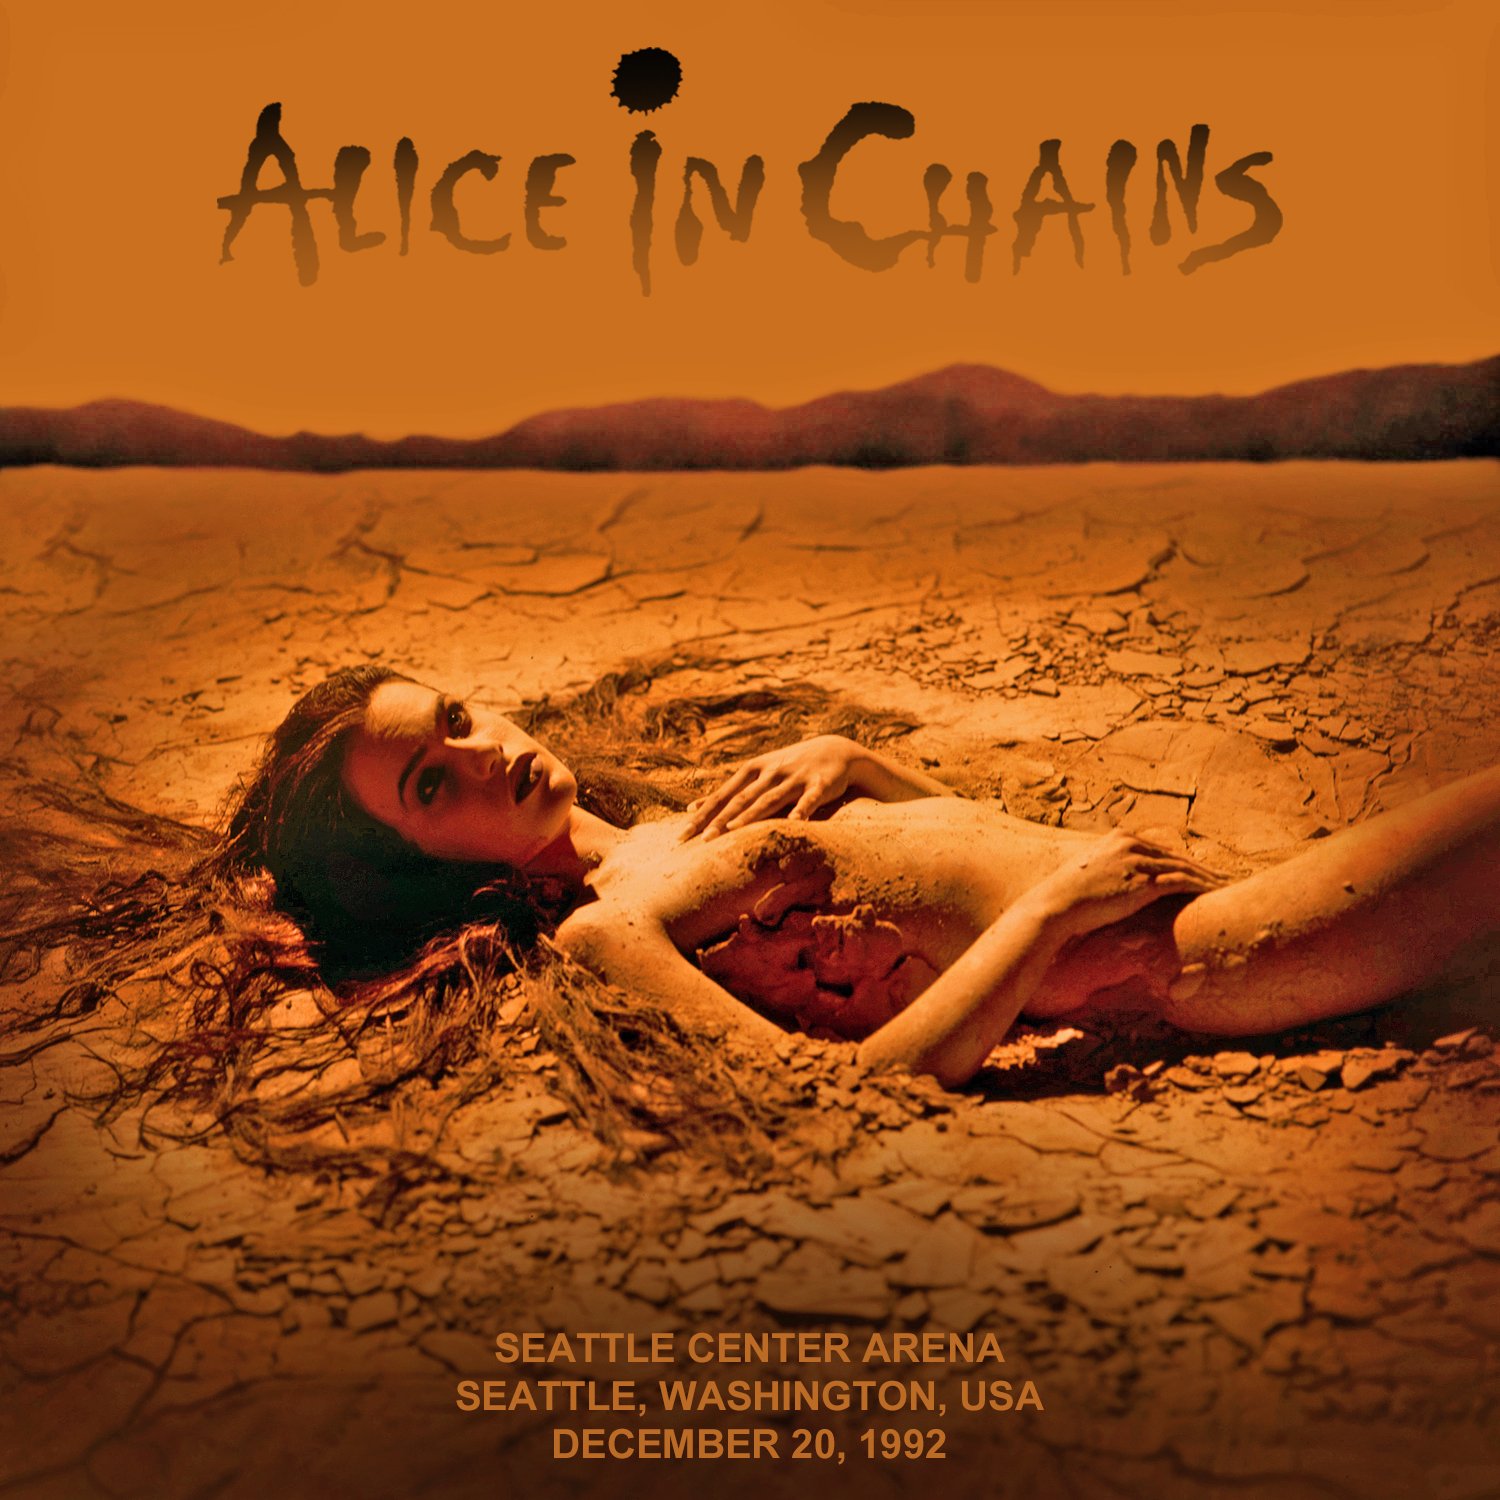 Seattle Mariners Hosting “Alice in Chains Night”